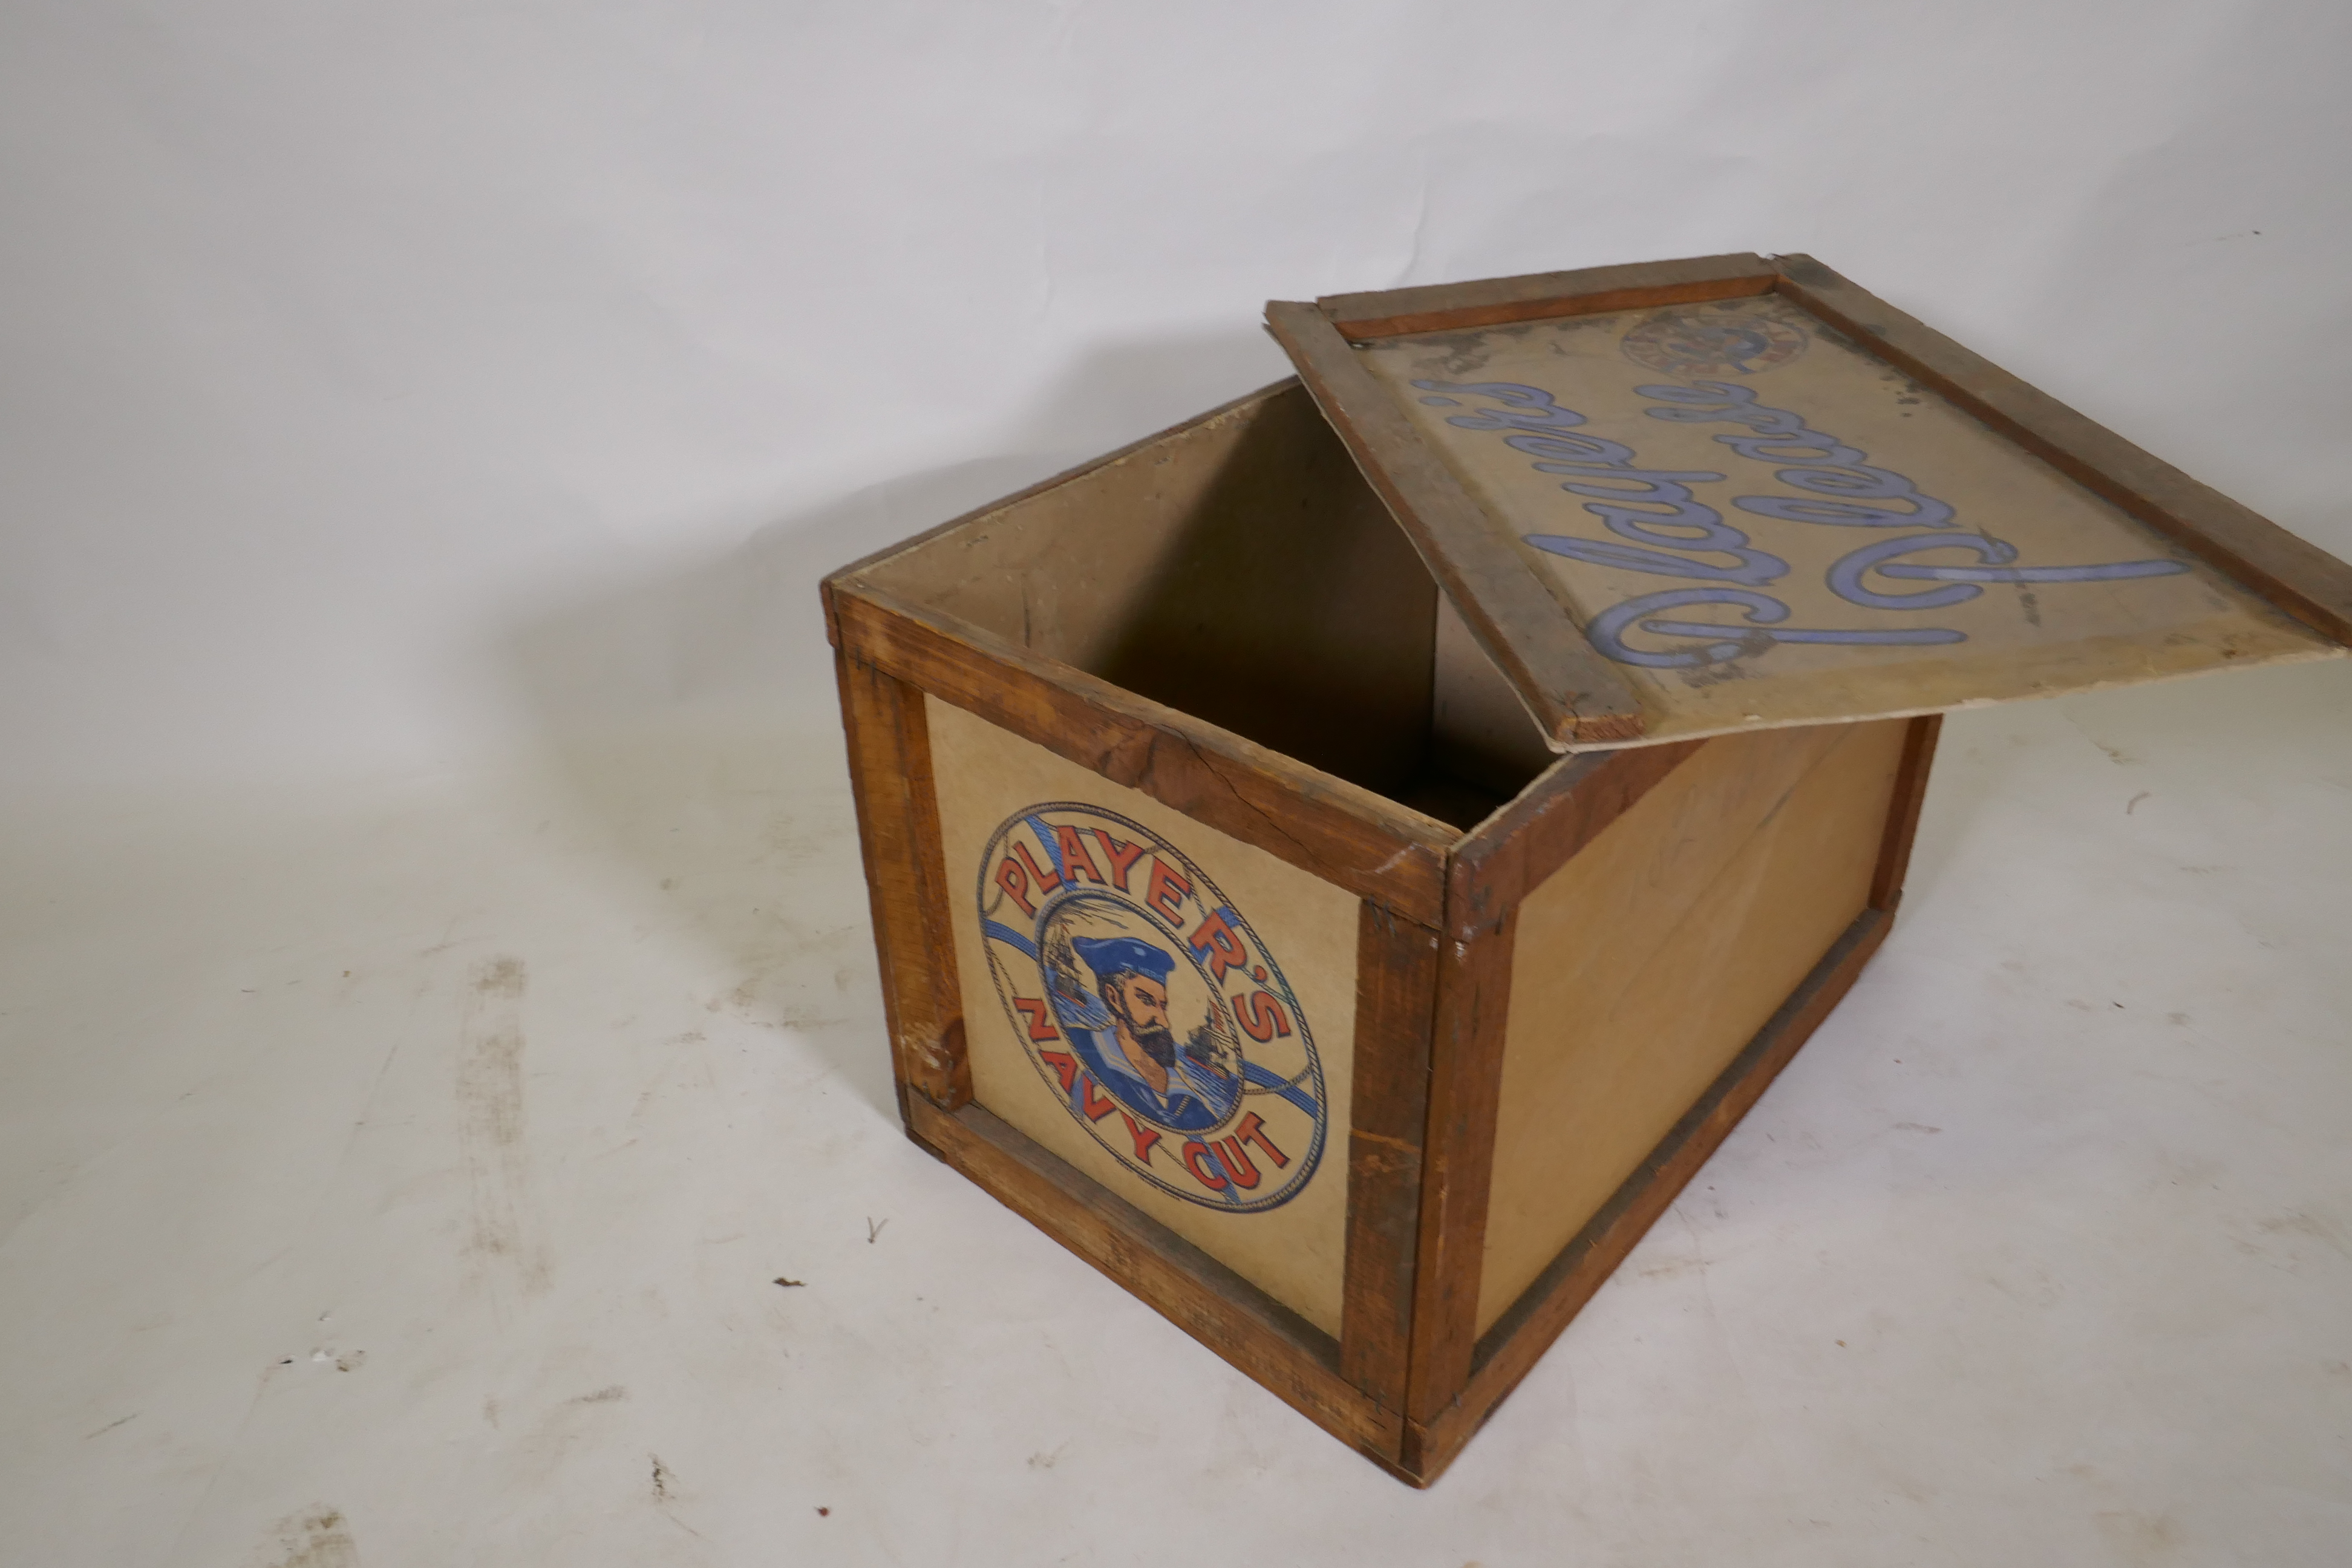 A vintage Player's Cigarettes packing case of cardboard and wood, 58 x 40 x 40cm - Image 4 of 4